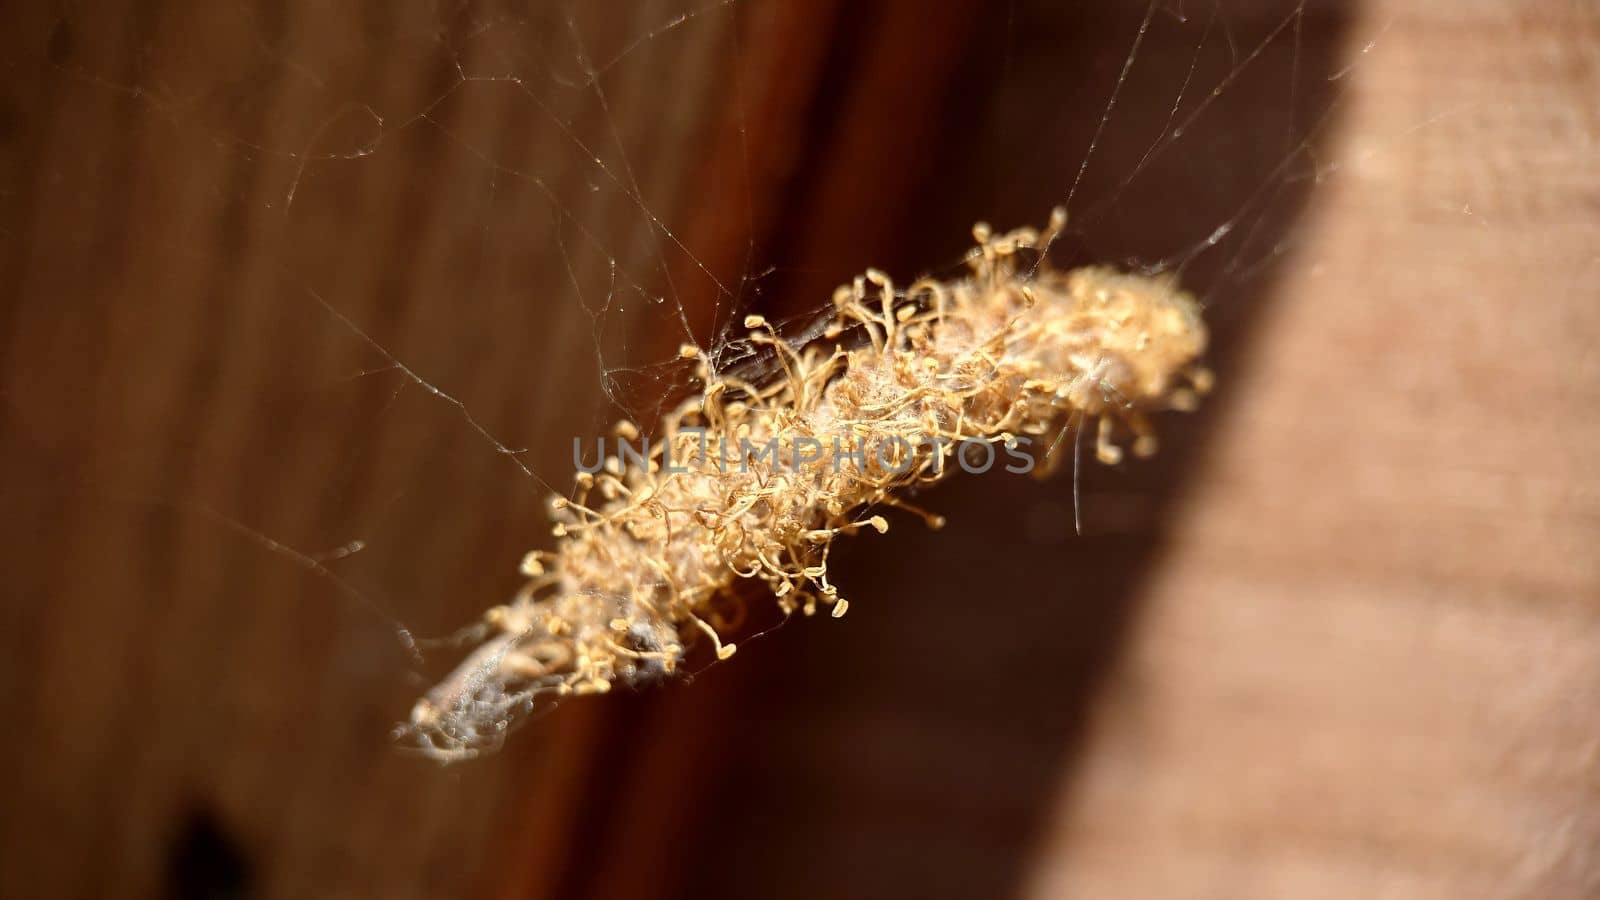 A dry golden bundle weighs on the web close-up by Mastak80